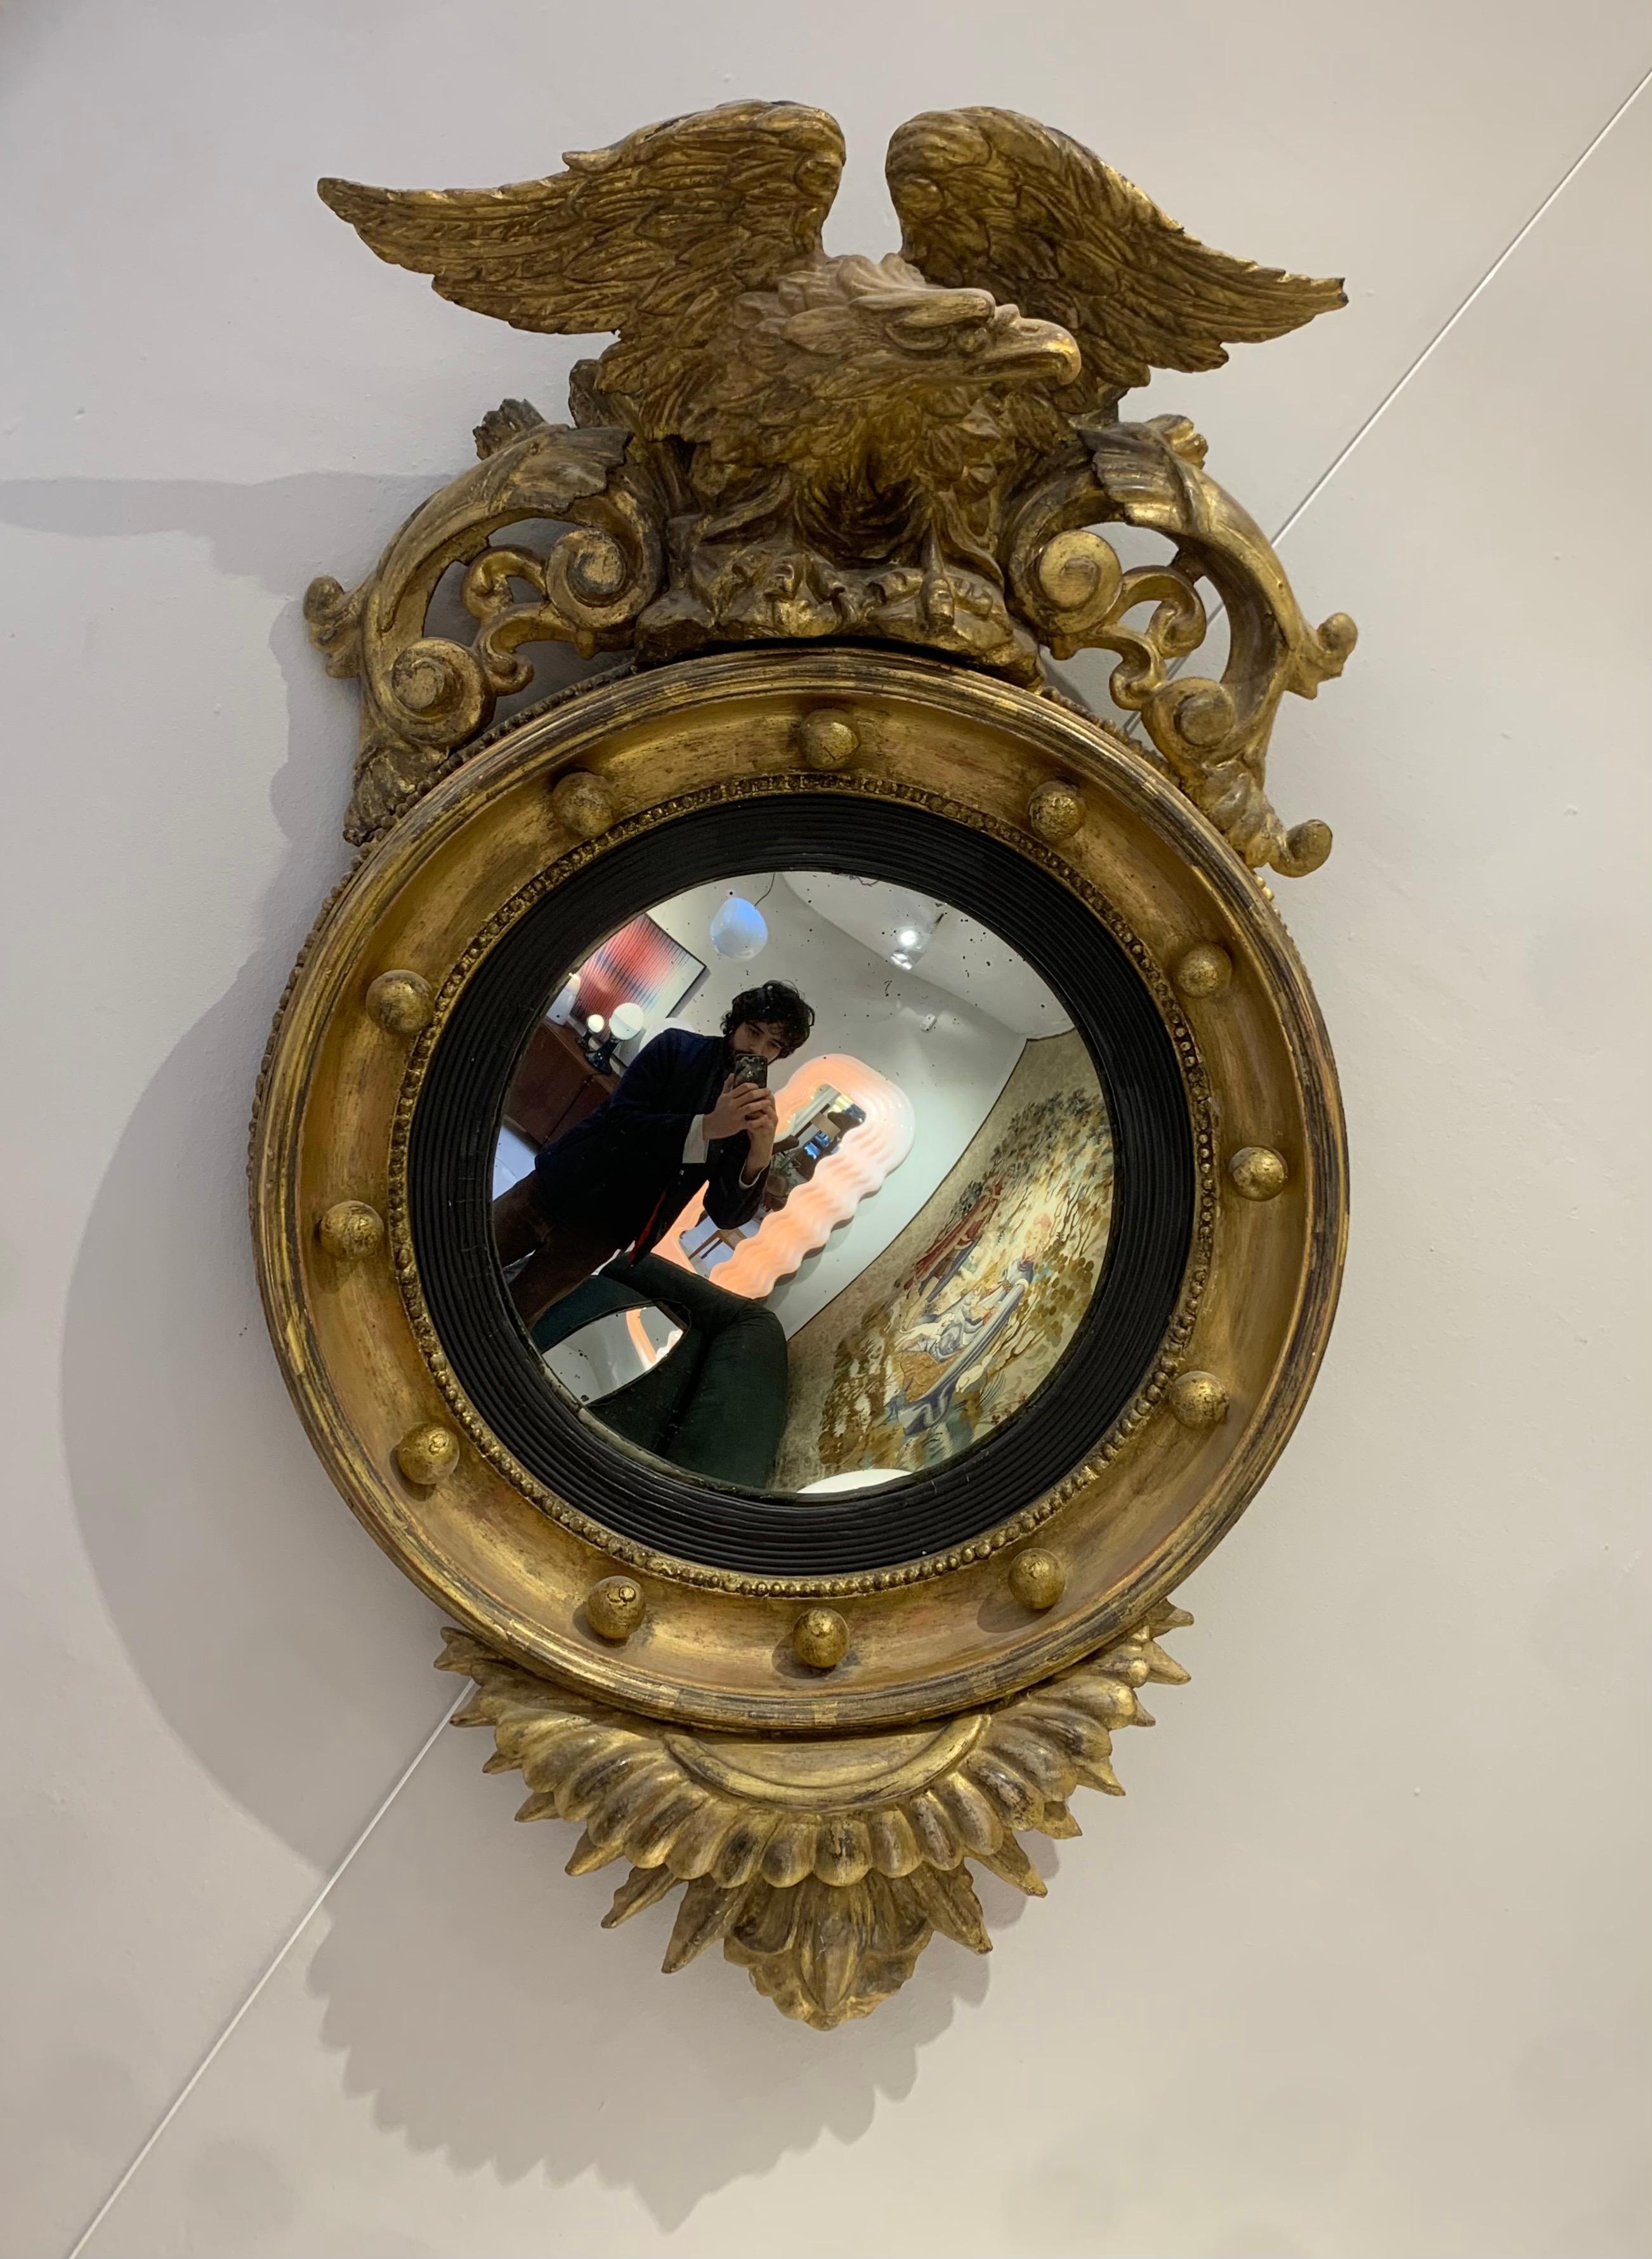 Belgian Gilded sculpted wood eagle convex mirror - c.19th century